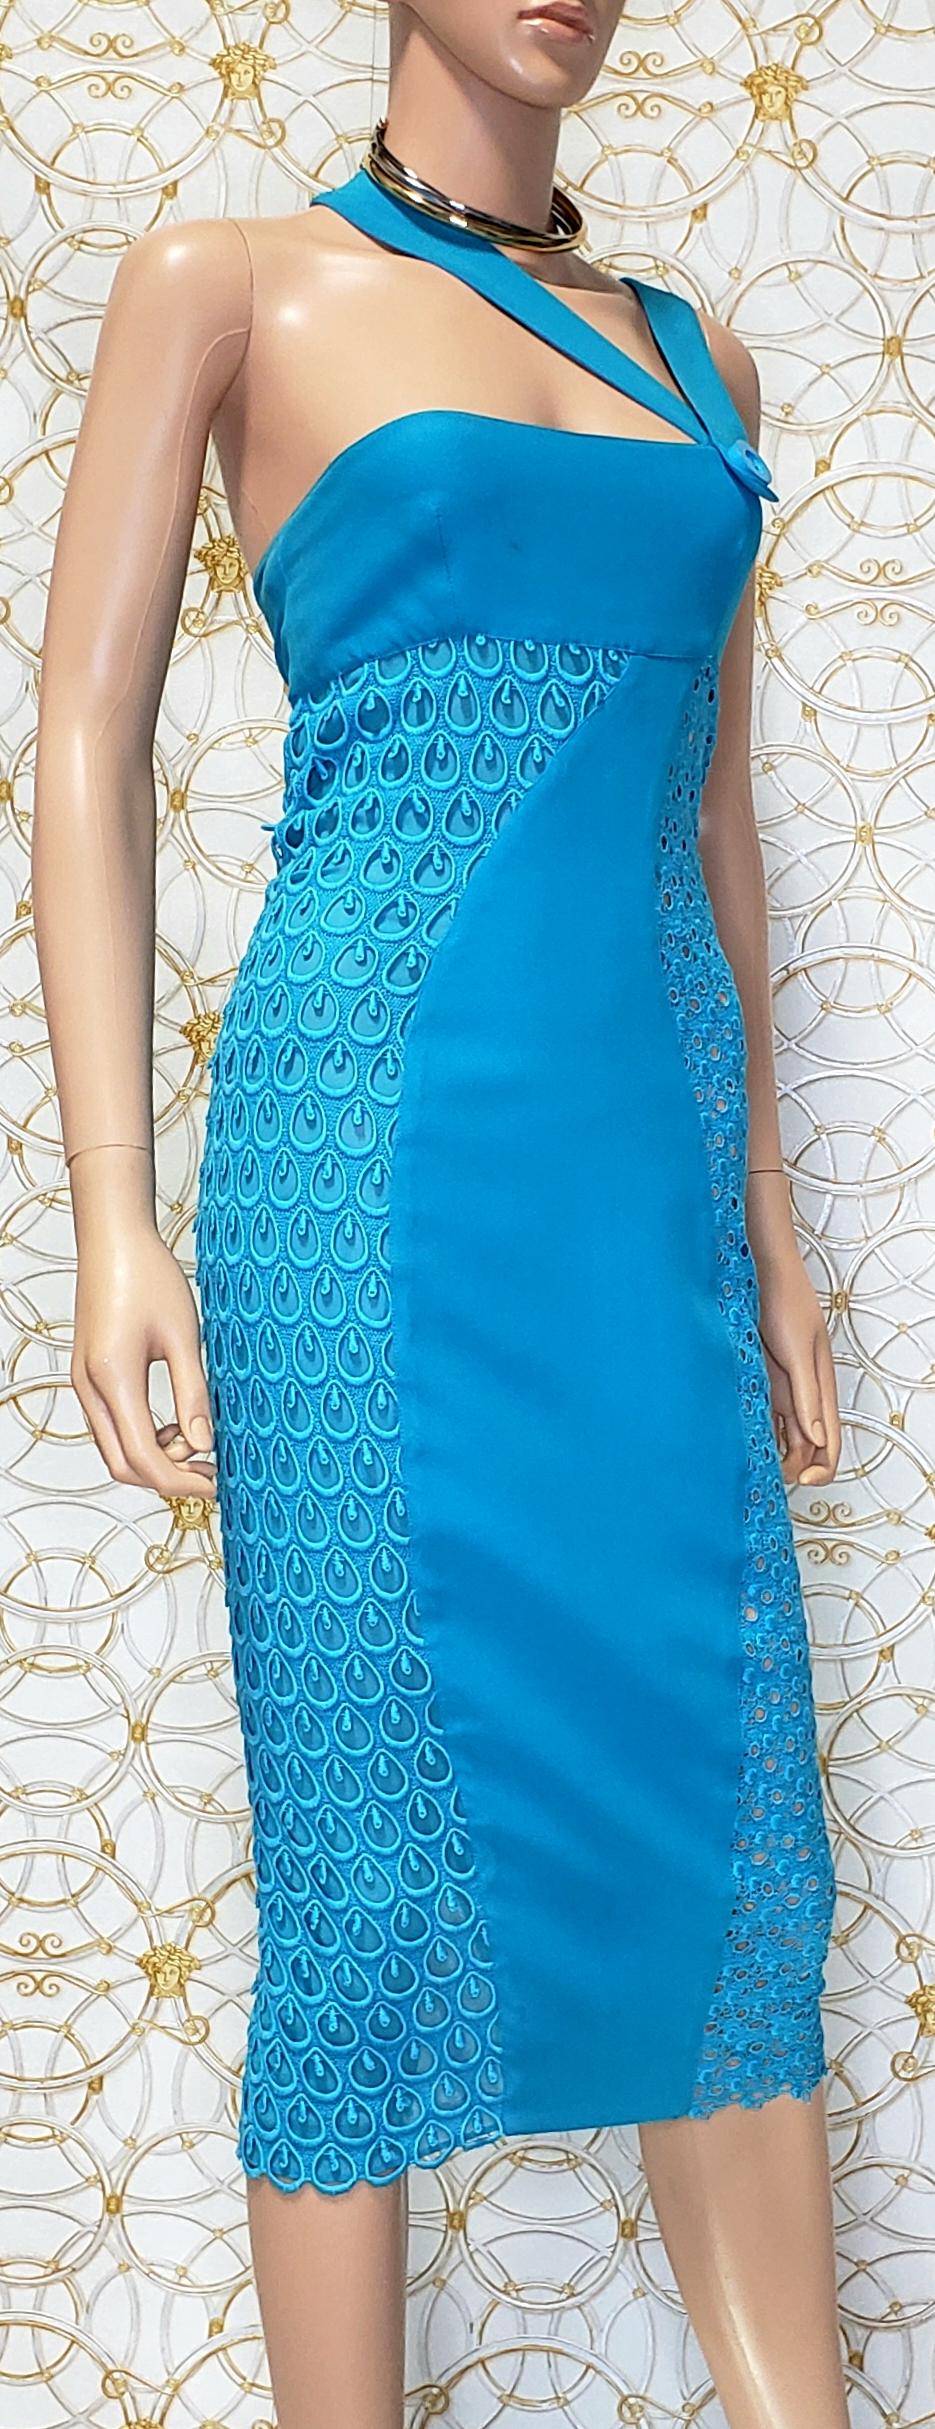 S/S 2011 look # 34 NEW VERSACE BLUE SILK EMBROIDERED Dress 38 - 2 For Sale 2